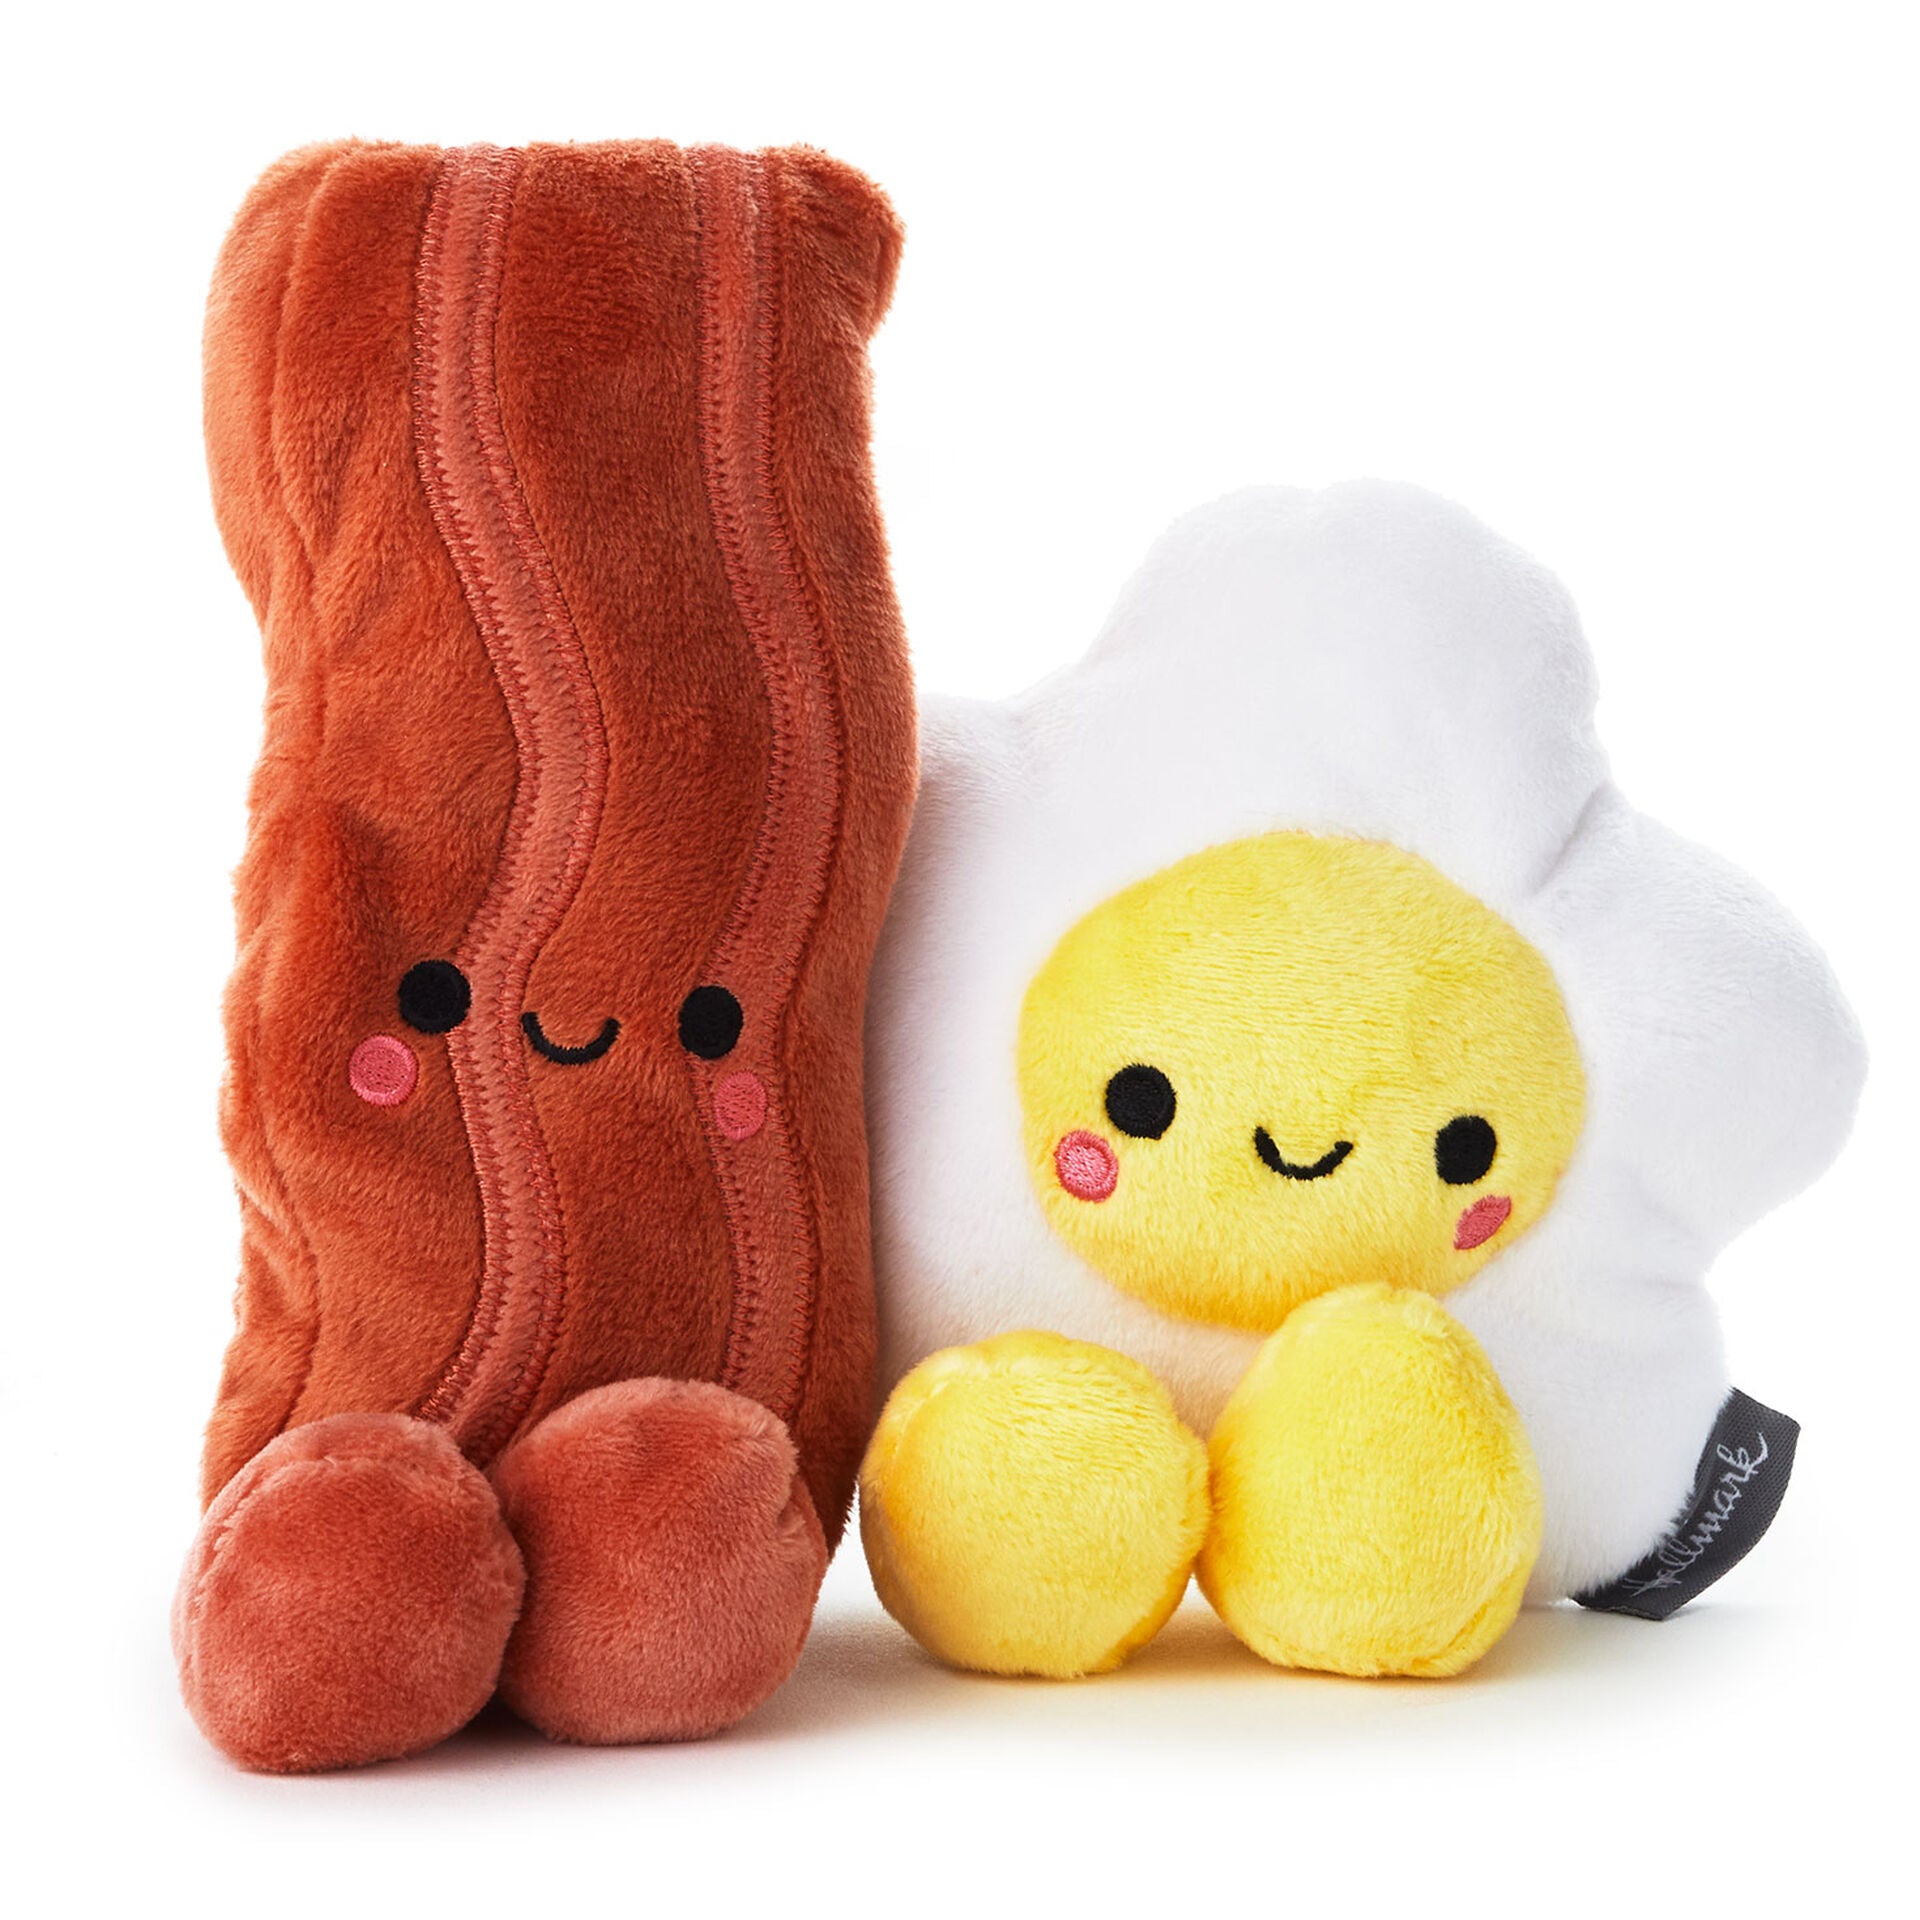 Better Together Bacon and Eggs Magnetic Plush